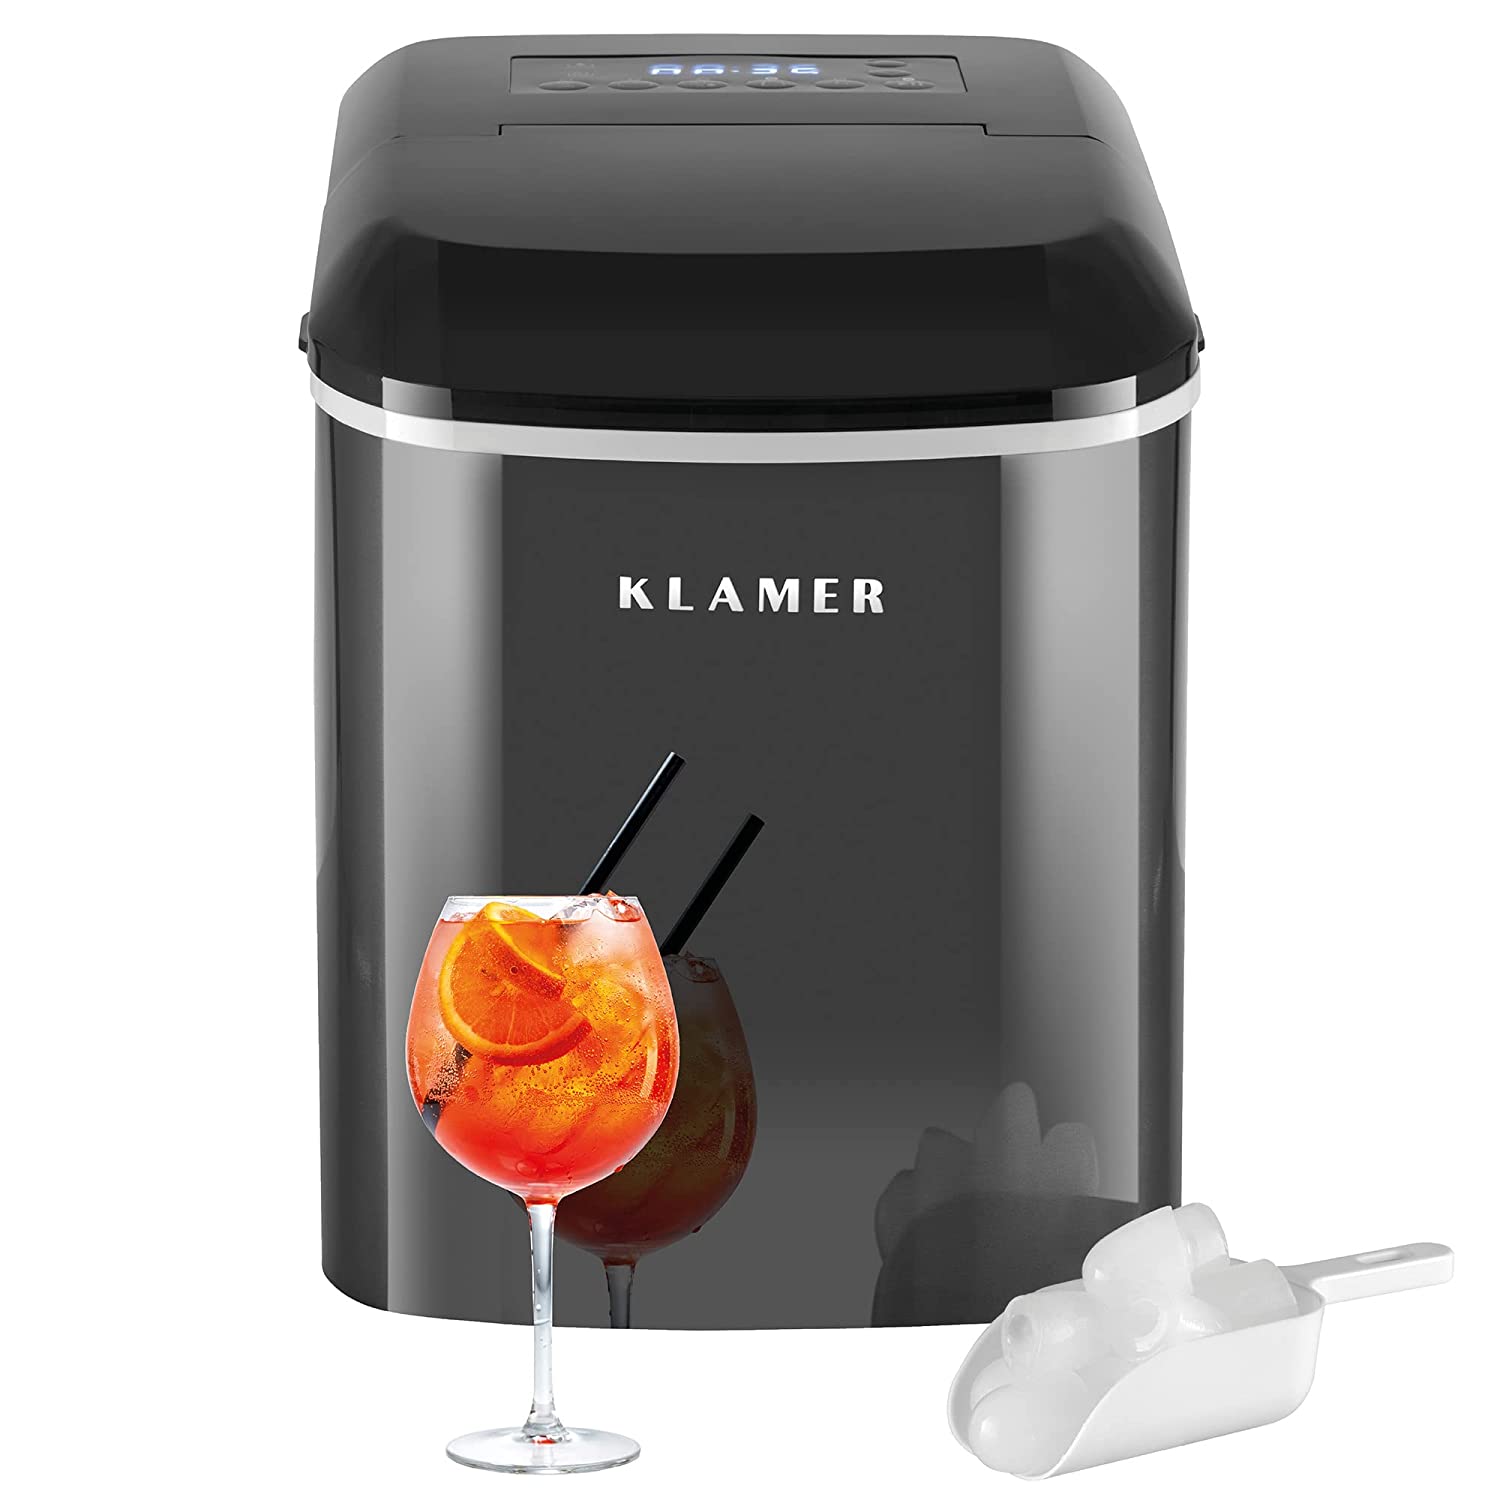 KLAMER Ice Cube Machine (2023), 10 Ice Cubes in 7 Minutes, 15 kg Ice Cubes per Day, 2 Ice Cube Sizes, 2.1 L Water Tank, 120 W Ice Maker with Timer, Quiet Ice Cube Maker with Ice Scoop